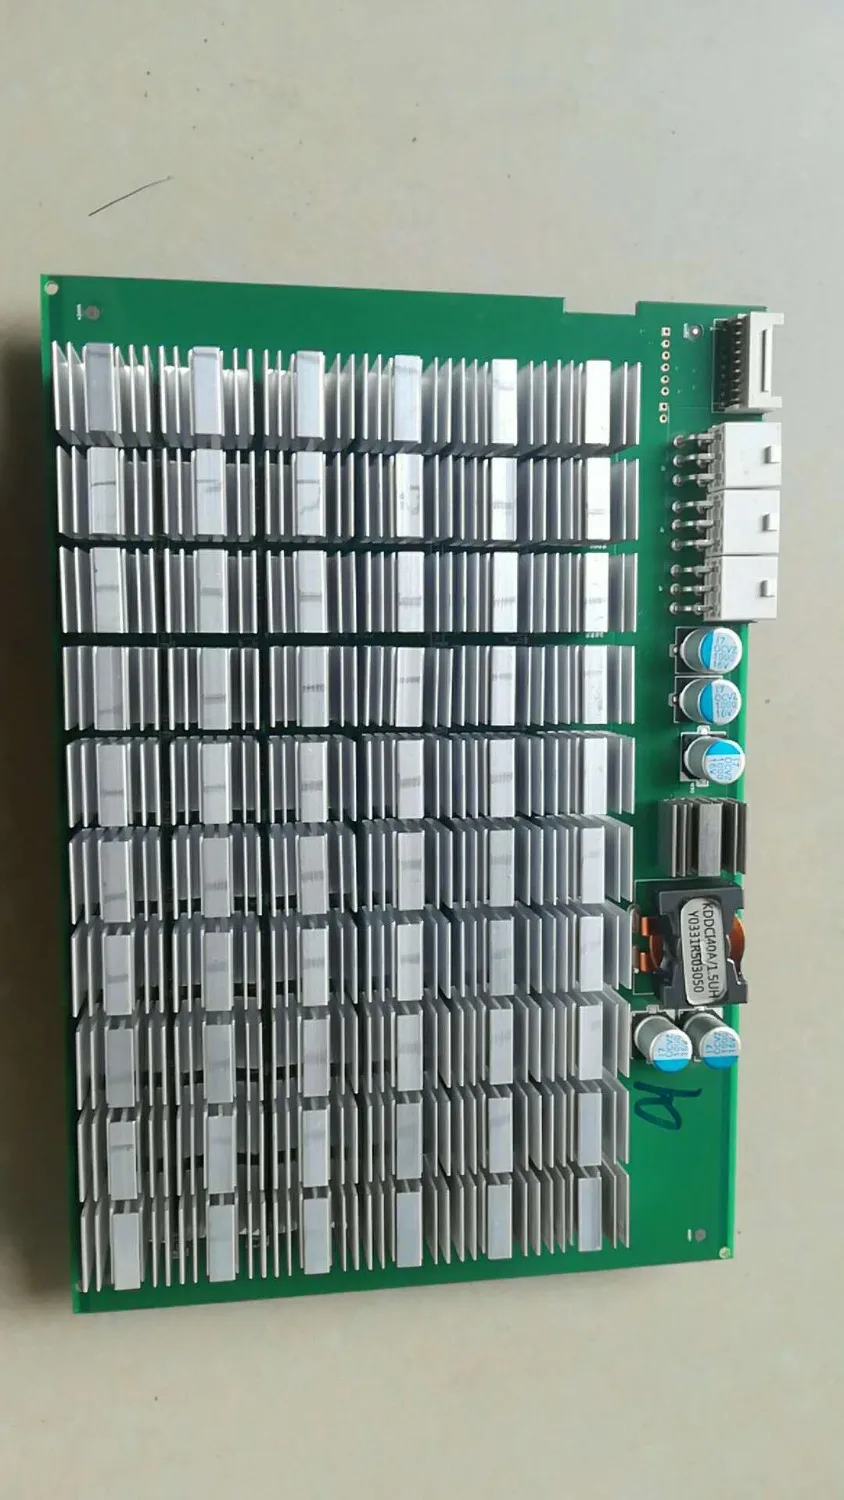 

DASH Miner Bitmain ANTMINER D3 17 GH/S Hash Board Replace The Broken Part Of X11 Miner Antminer D3 17G Hash Board